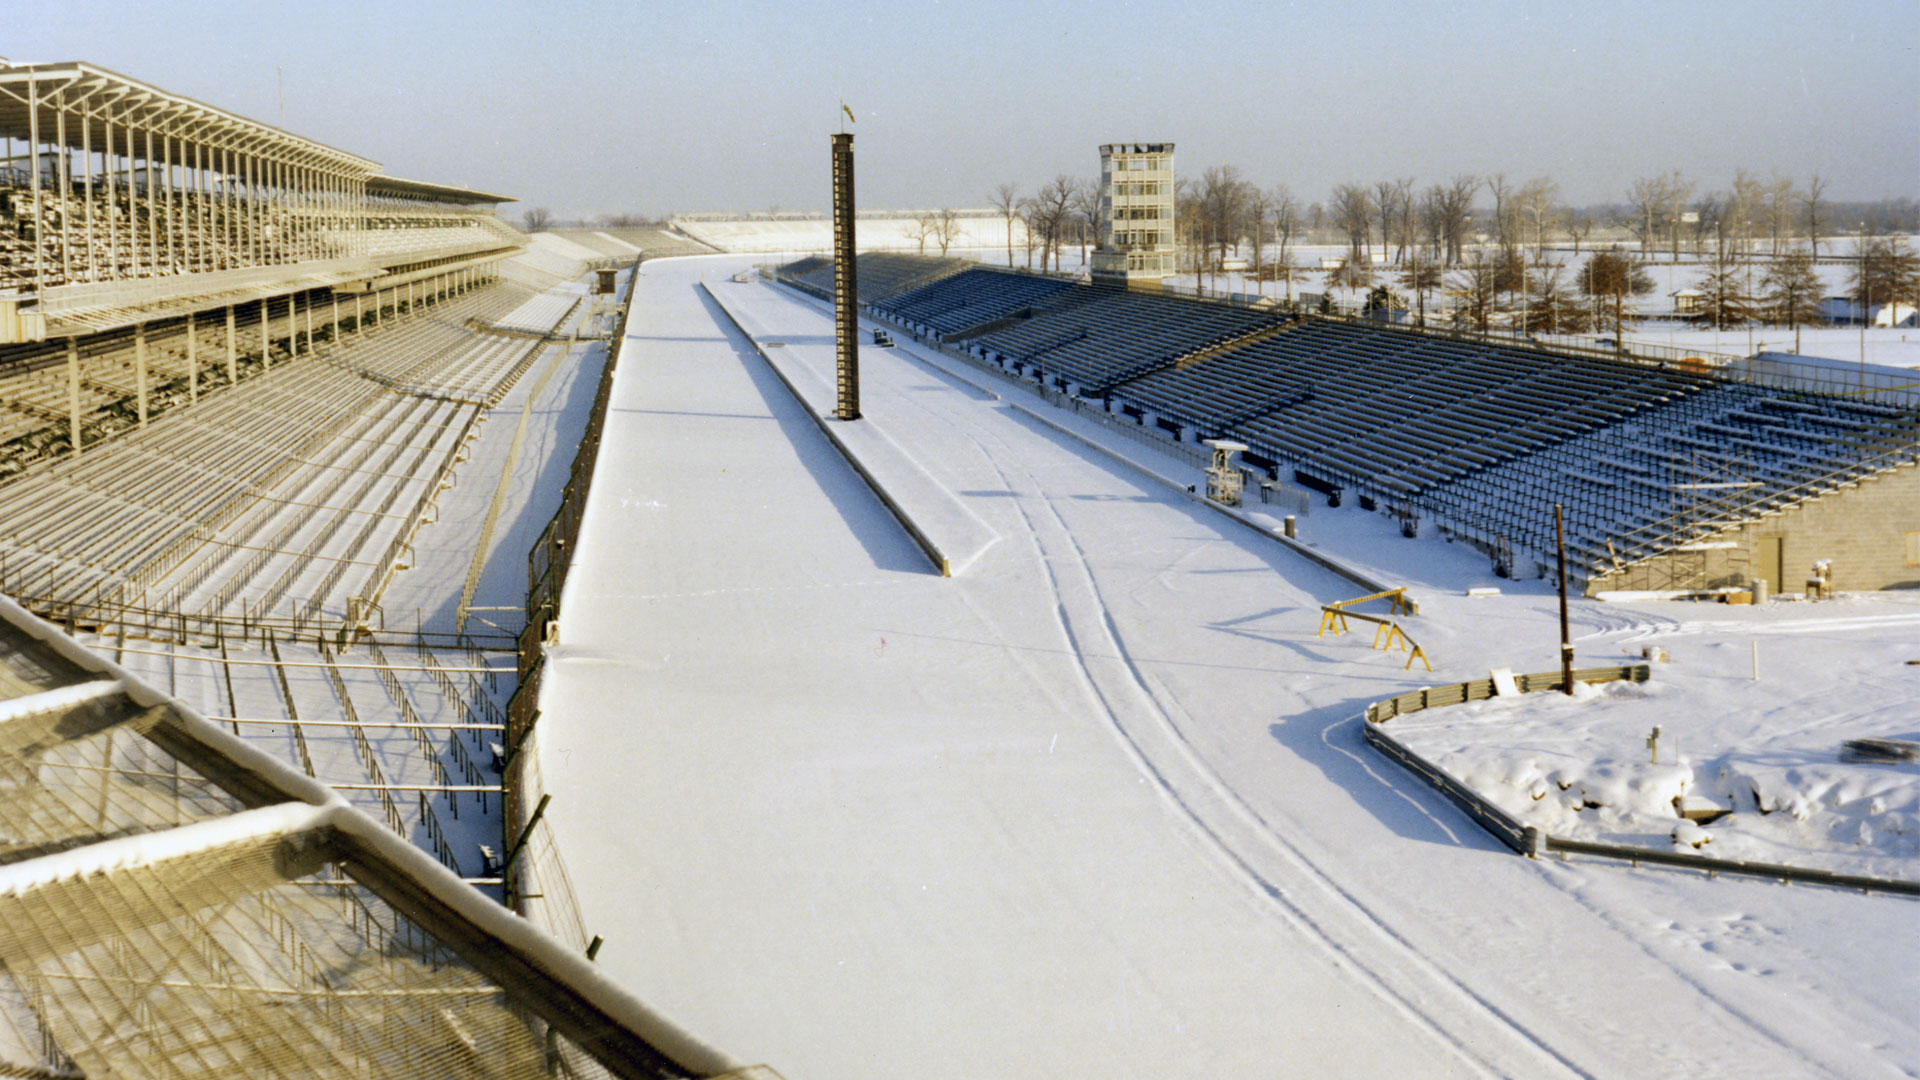 IMS Snow in 1977